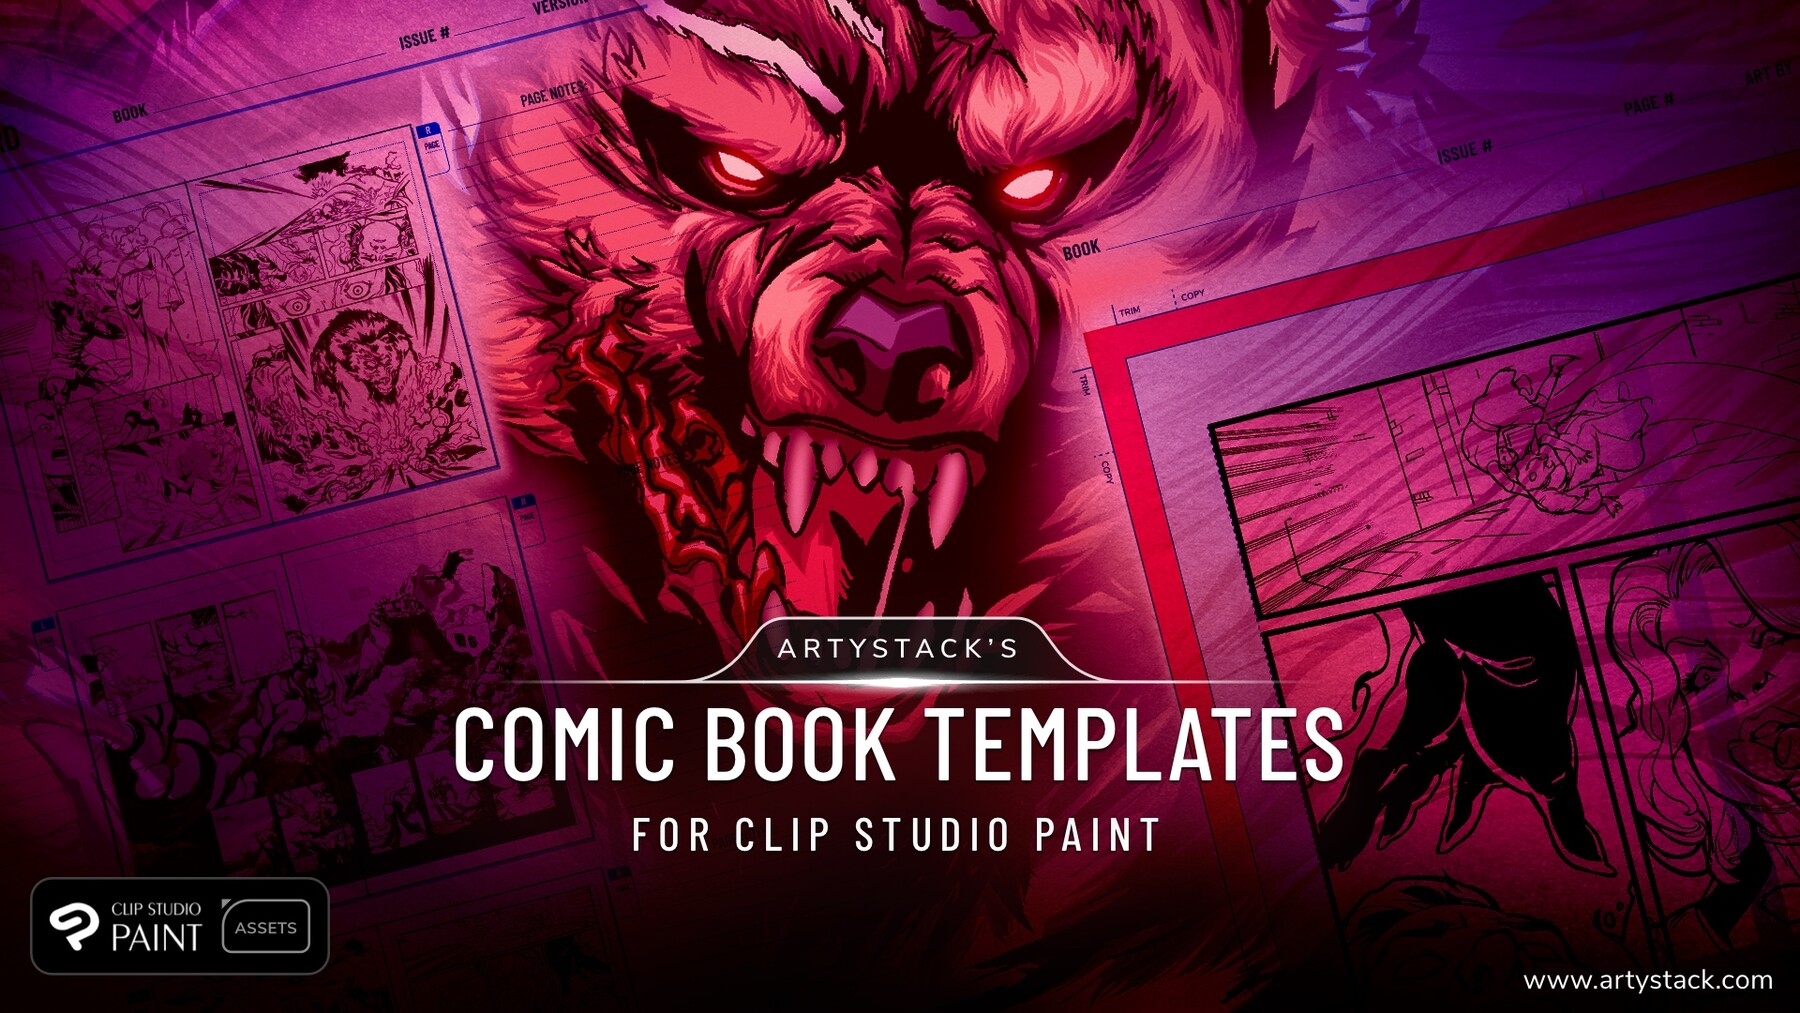 Standard Comic Book Page Templates for Clip Studio Paint